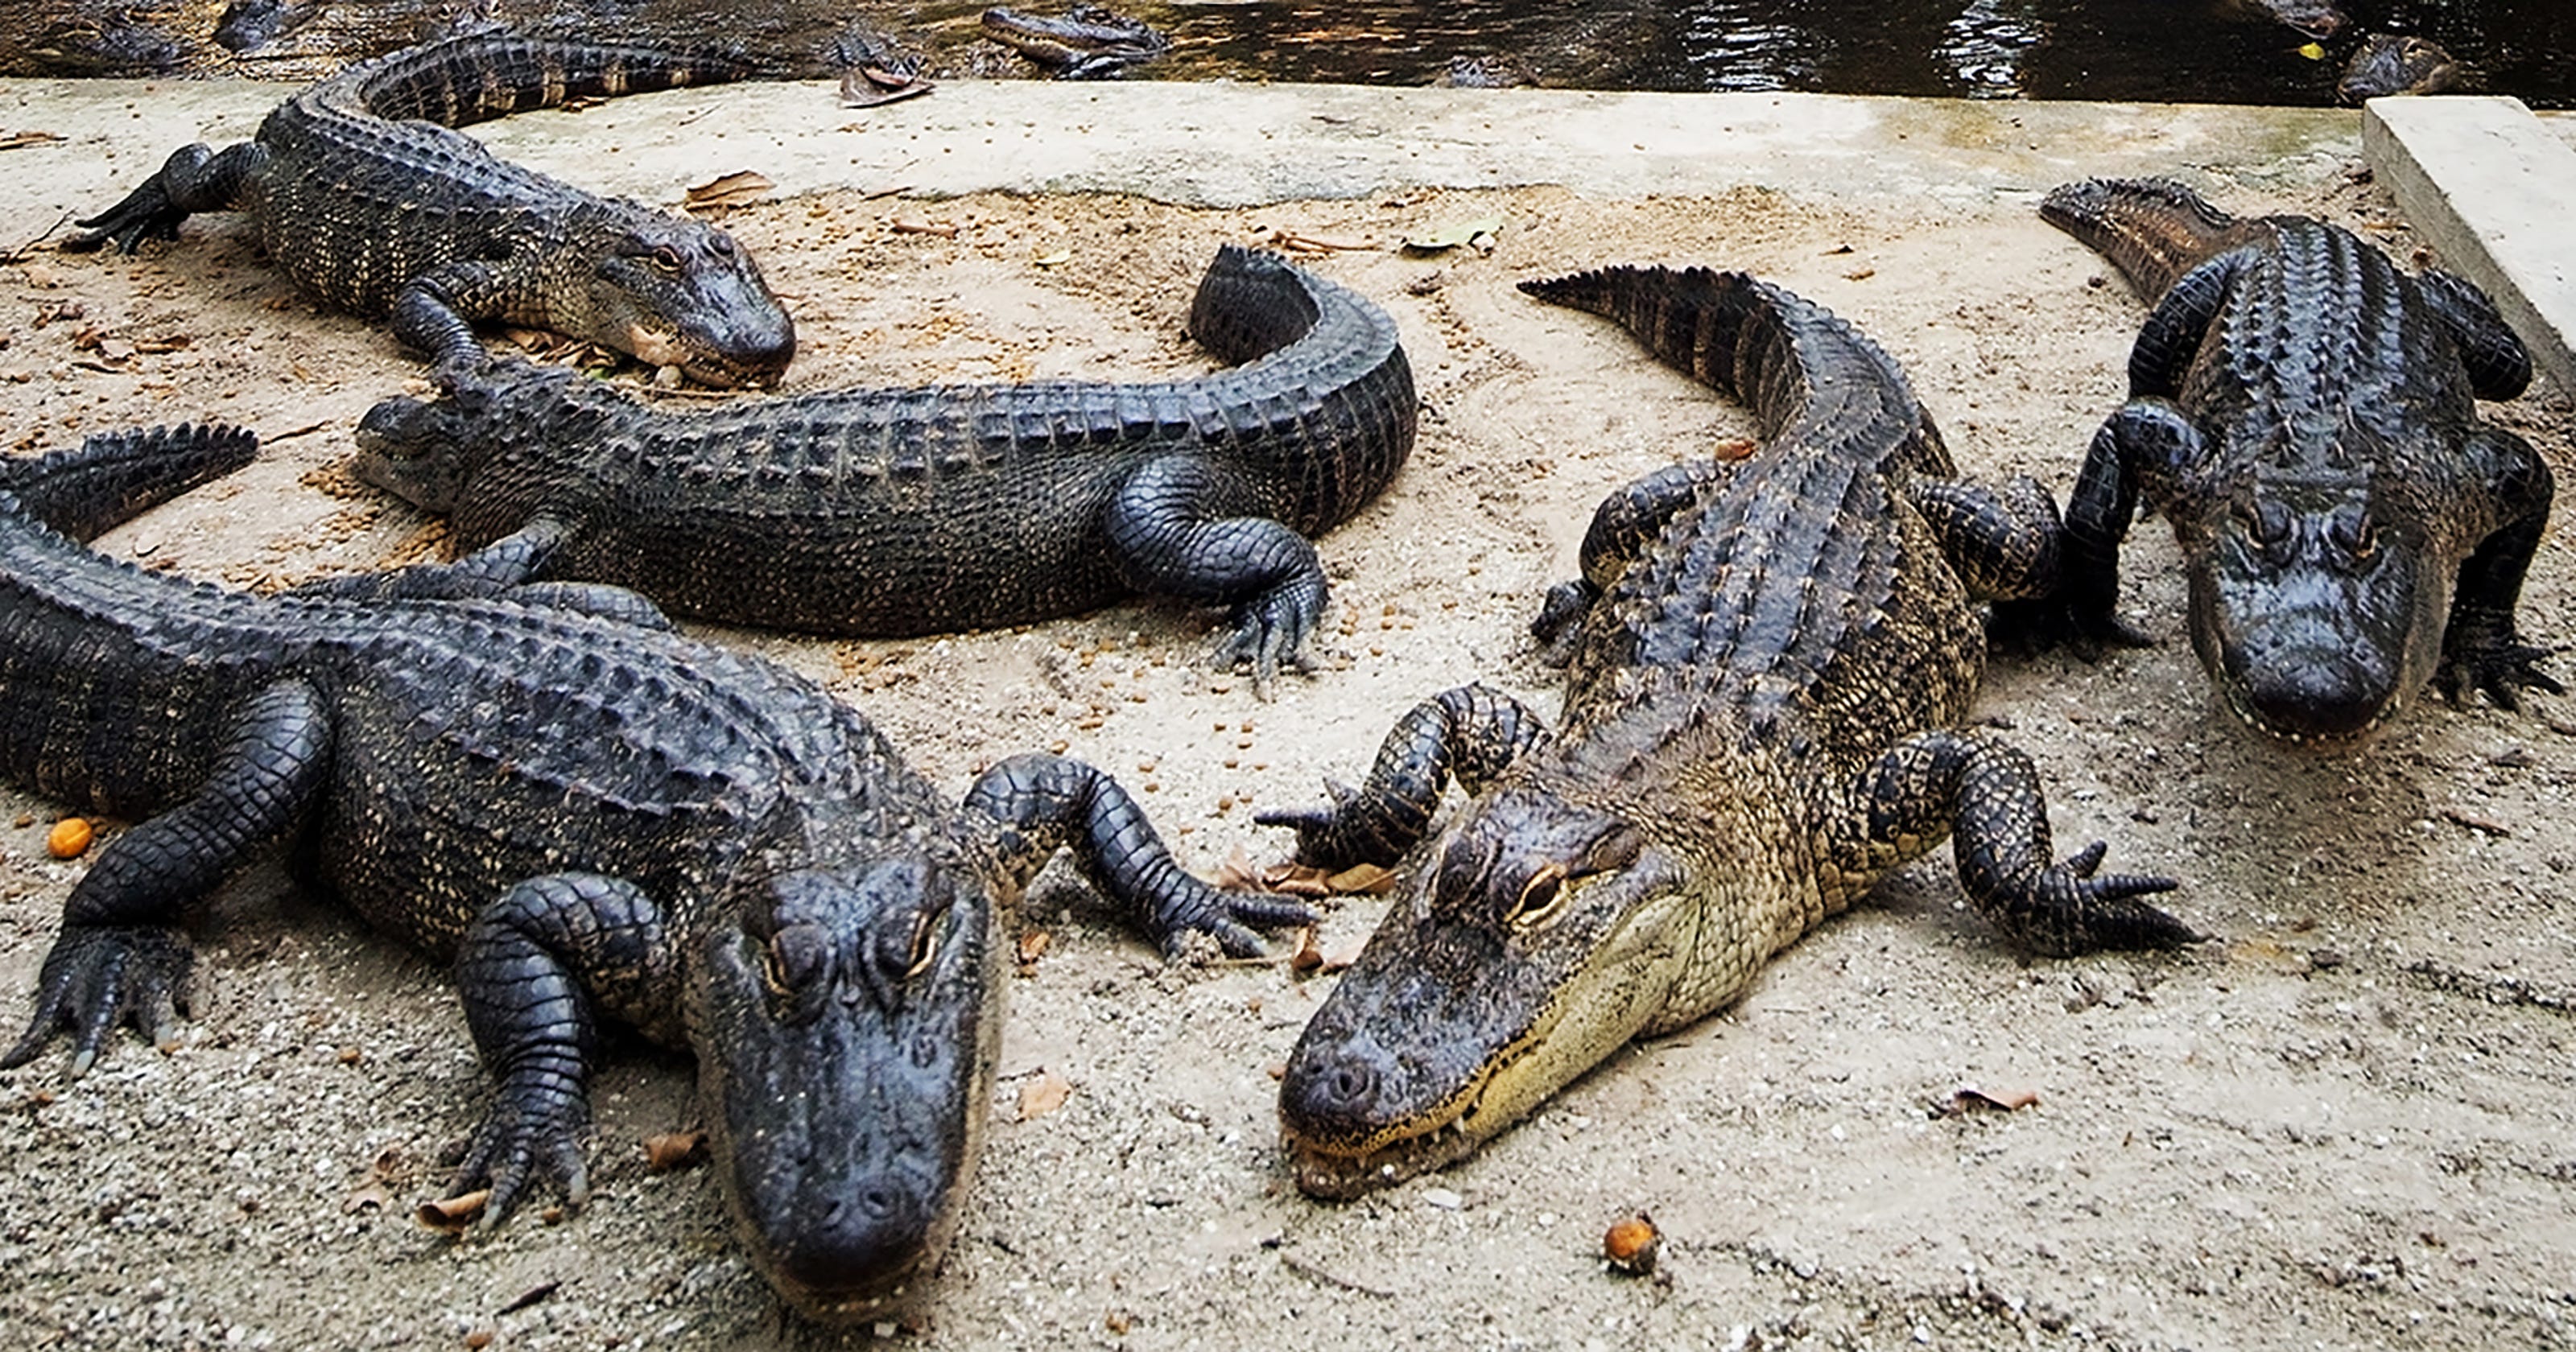 Tennessee Wildlife Resources Agency officials say alligators are